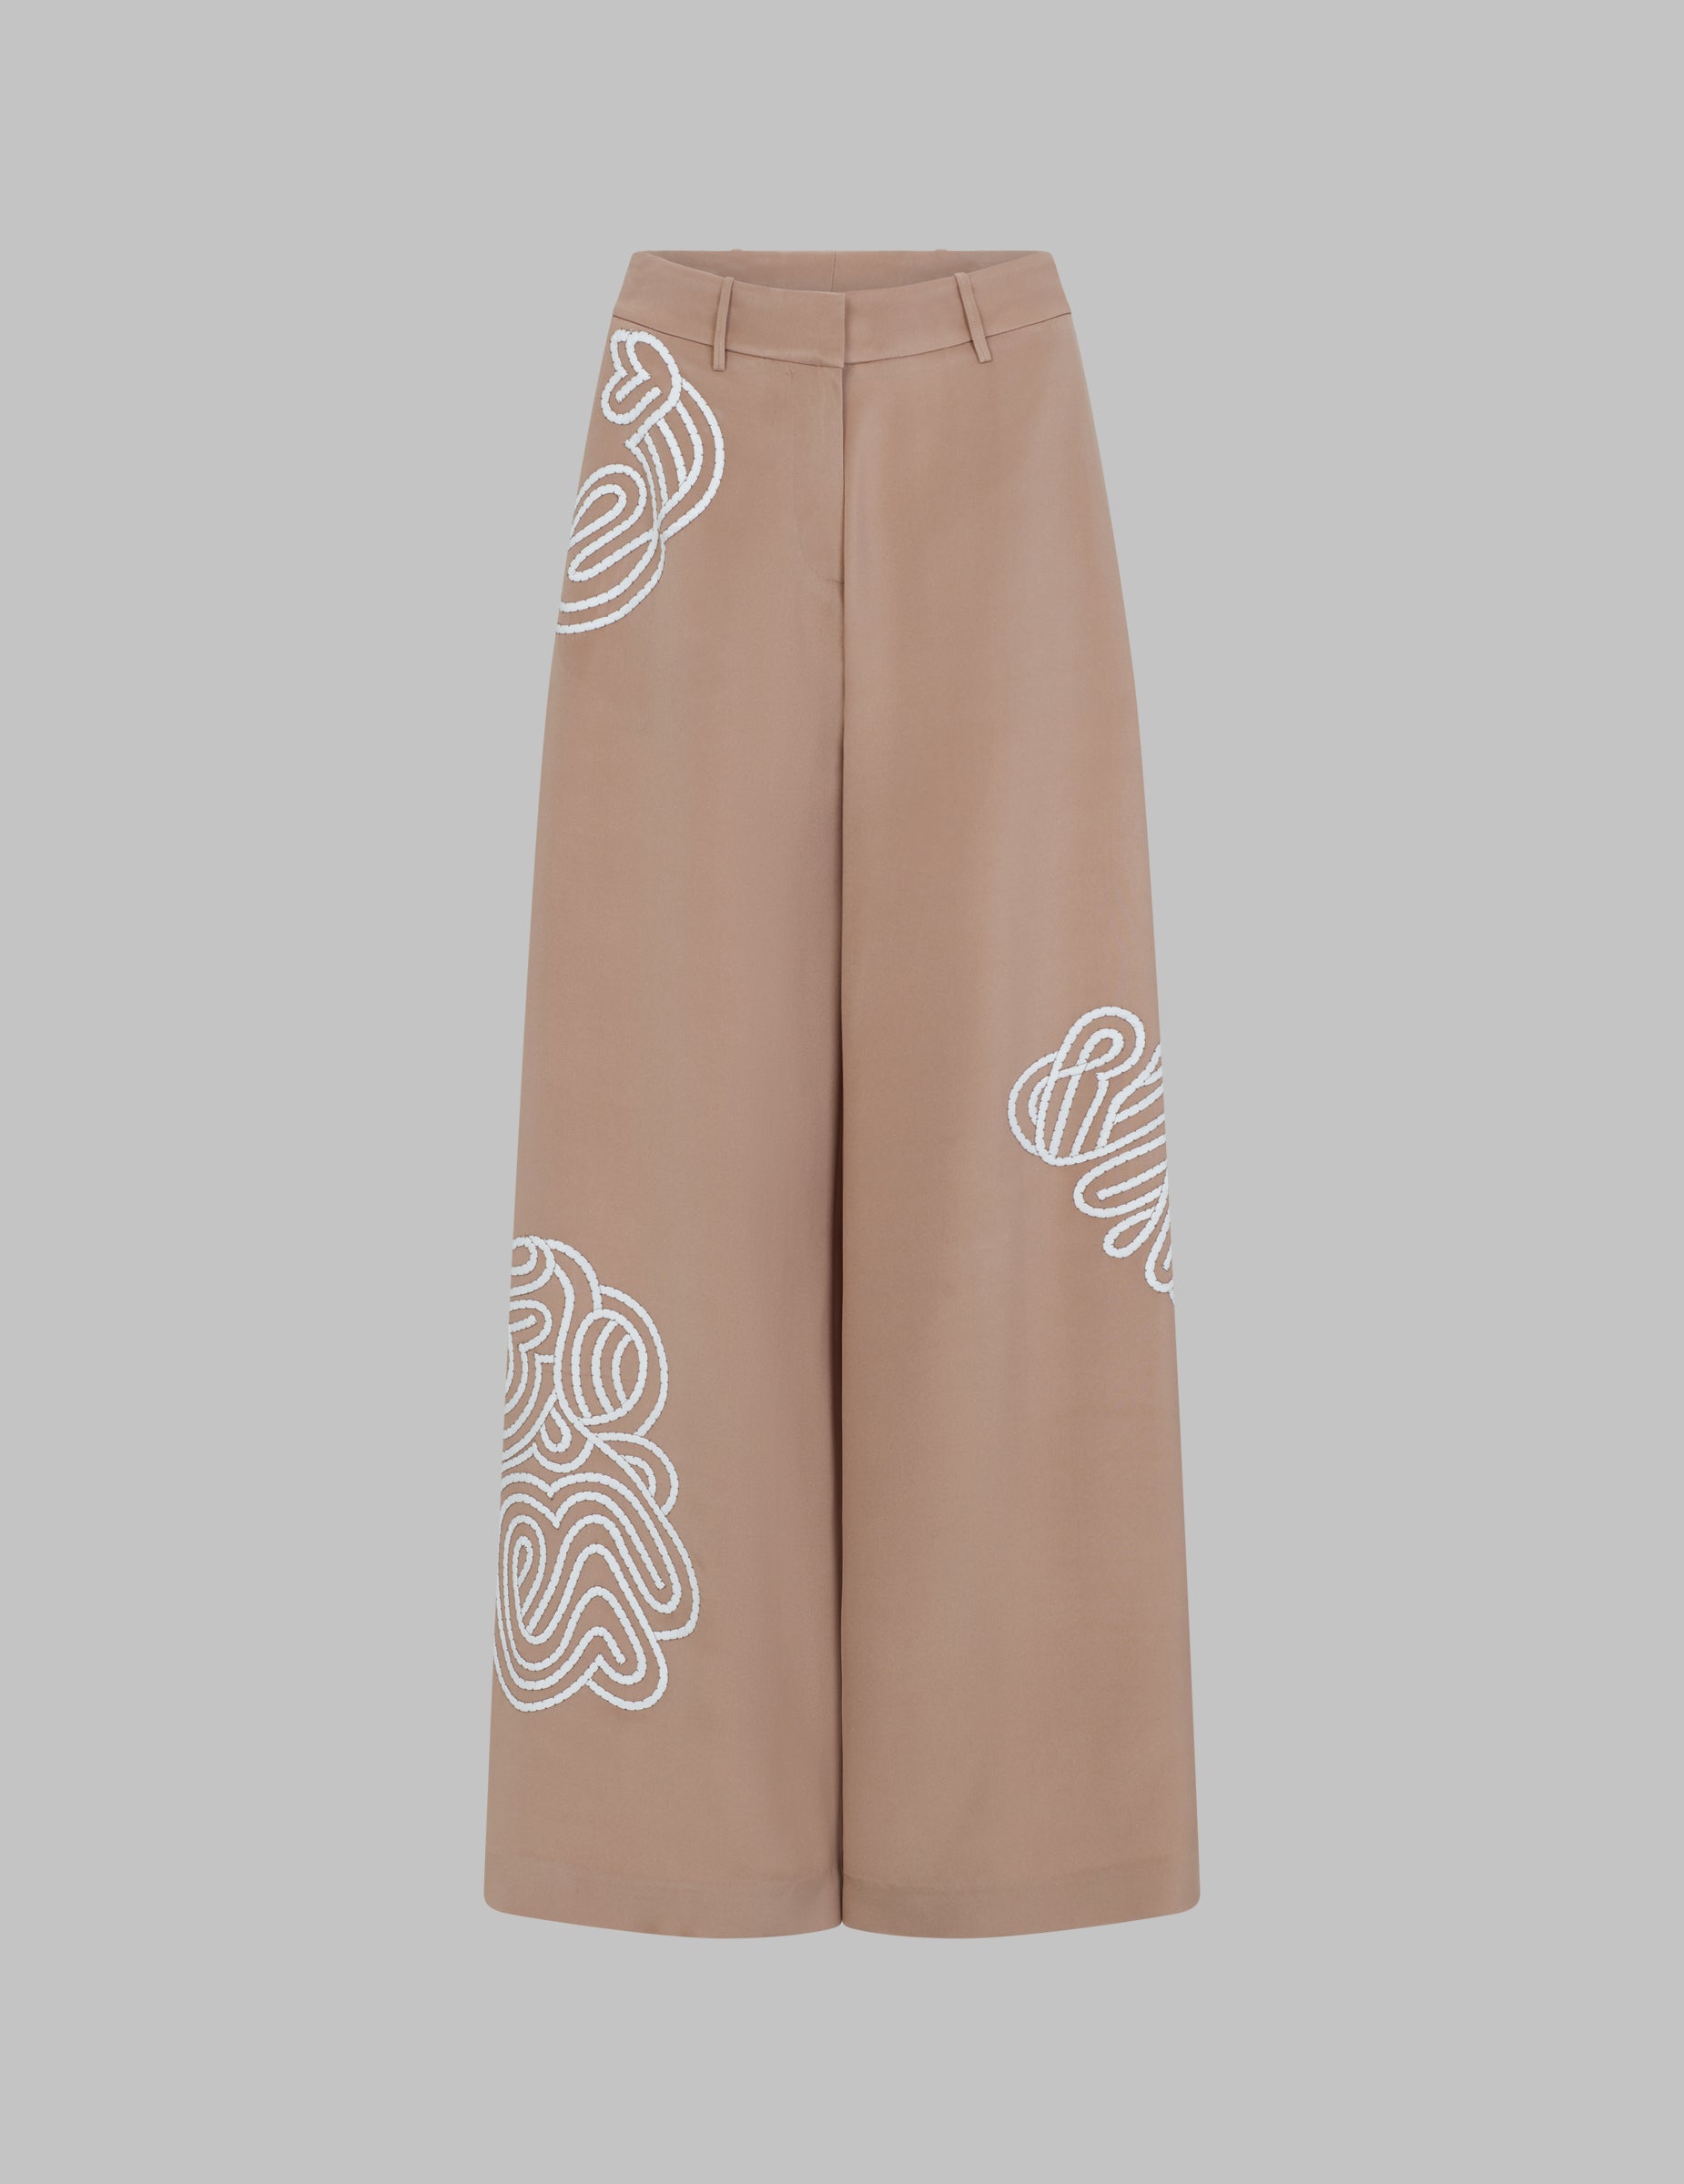 Buy A R Silk Women's and Girls Cotton Reyon Regular Fit Palazzo Pants(ARSP0192)  at Amazon.in